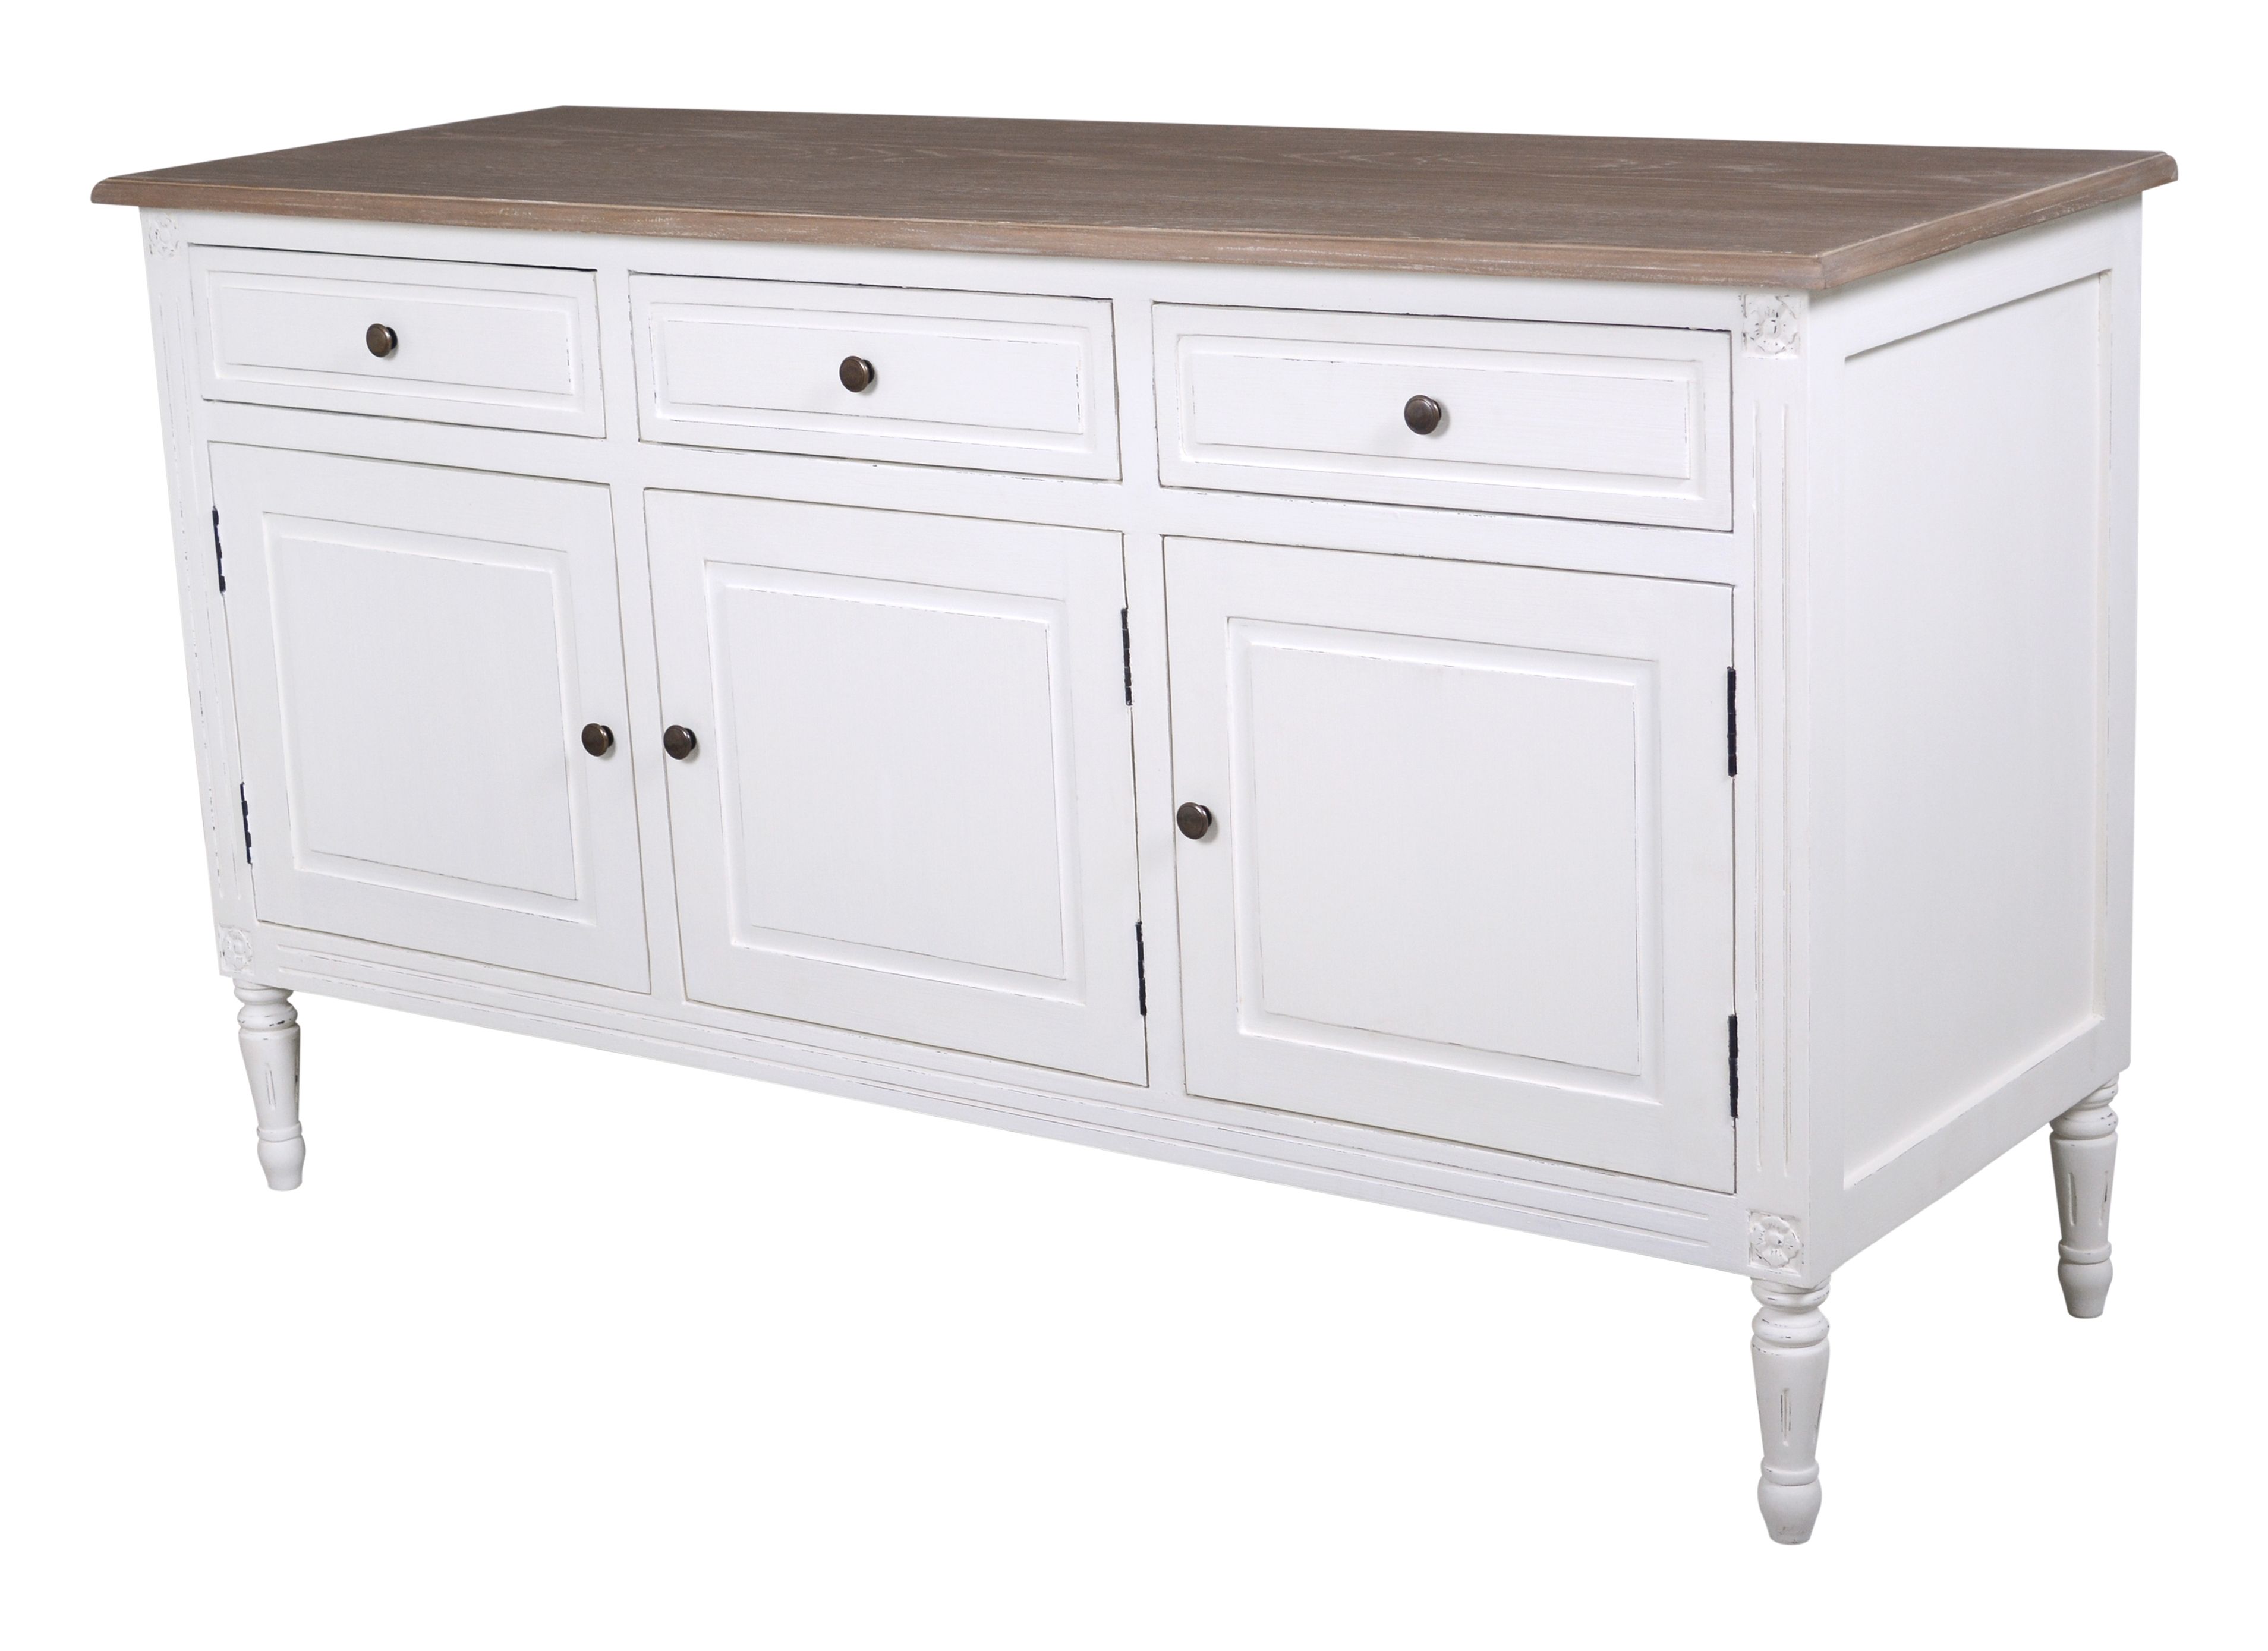 3 Drawer 3 Door Sideboard | Kelston House International Intended For Most Recently Released Antique White Distressed 3 Drawer/2 Door Sideboards (View 7 of 20)